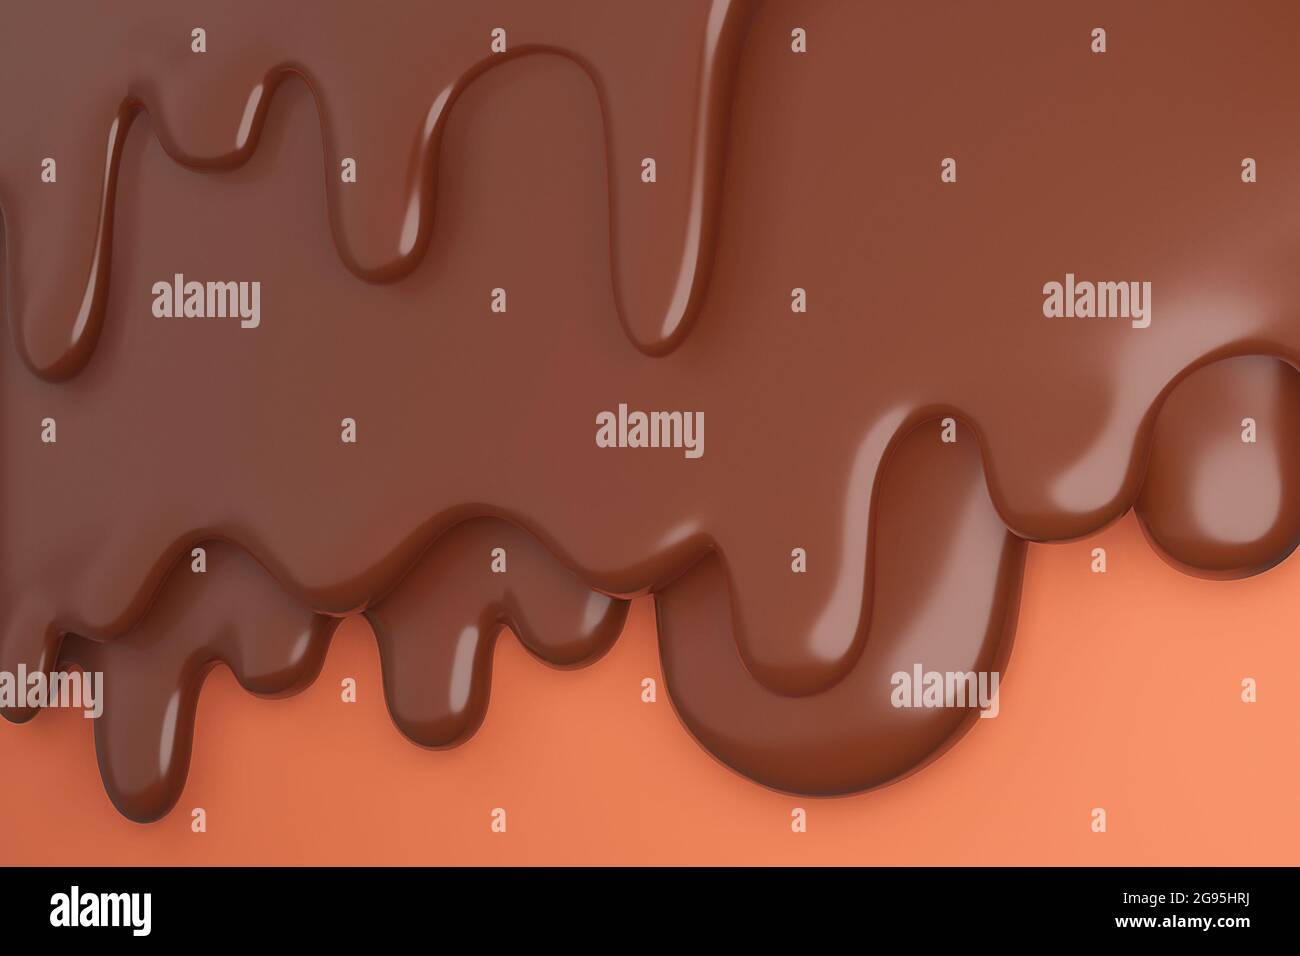 Melted milk brown chocolate flow down.,3d model and illustration. Stock Photo